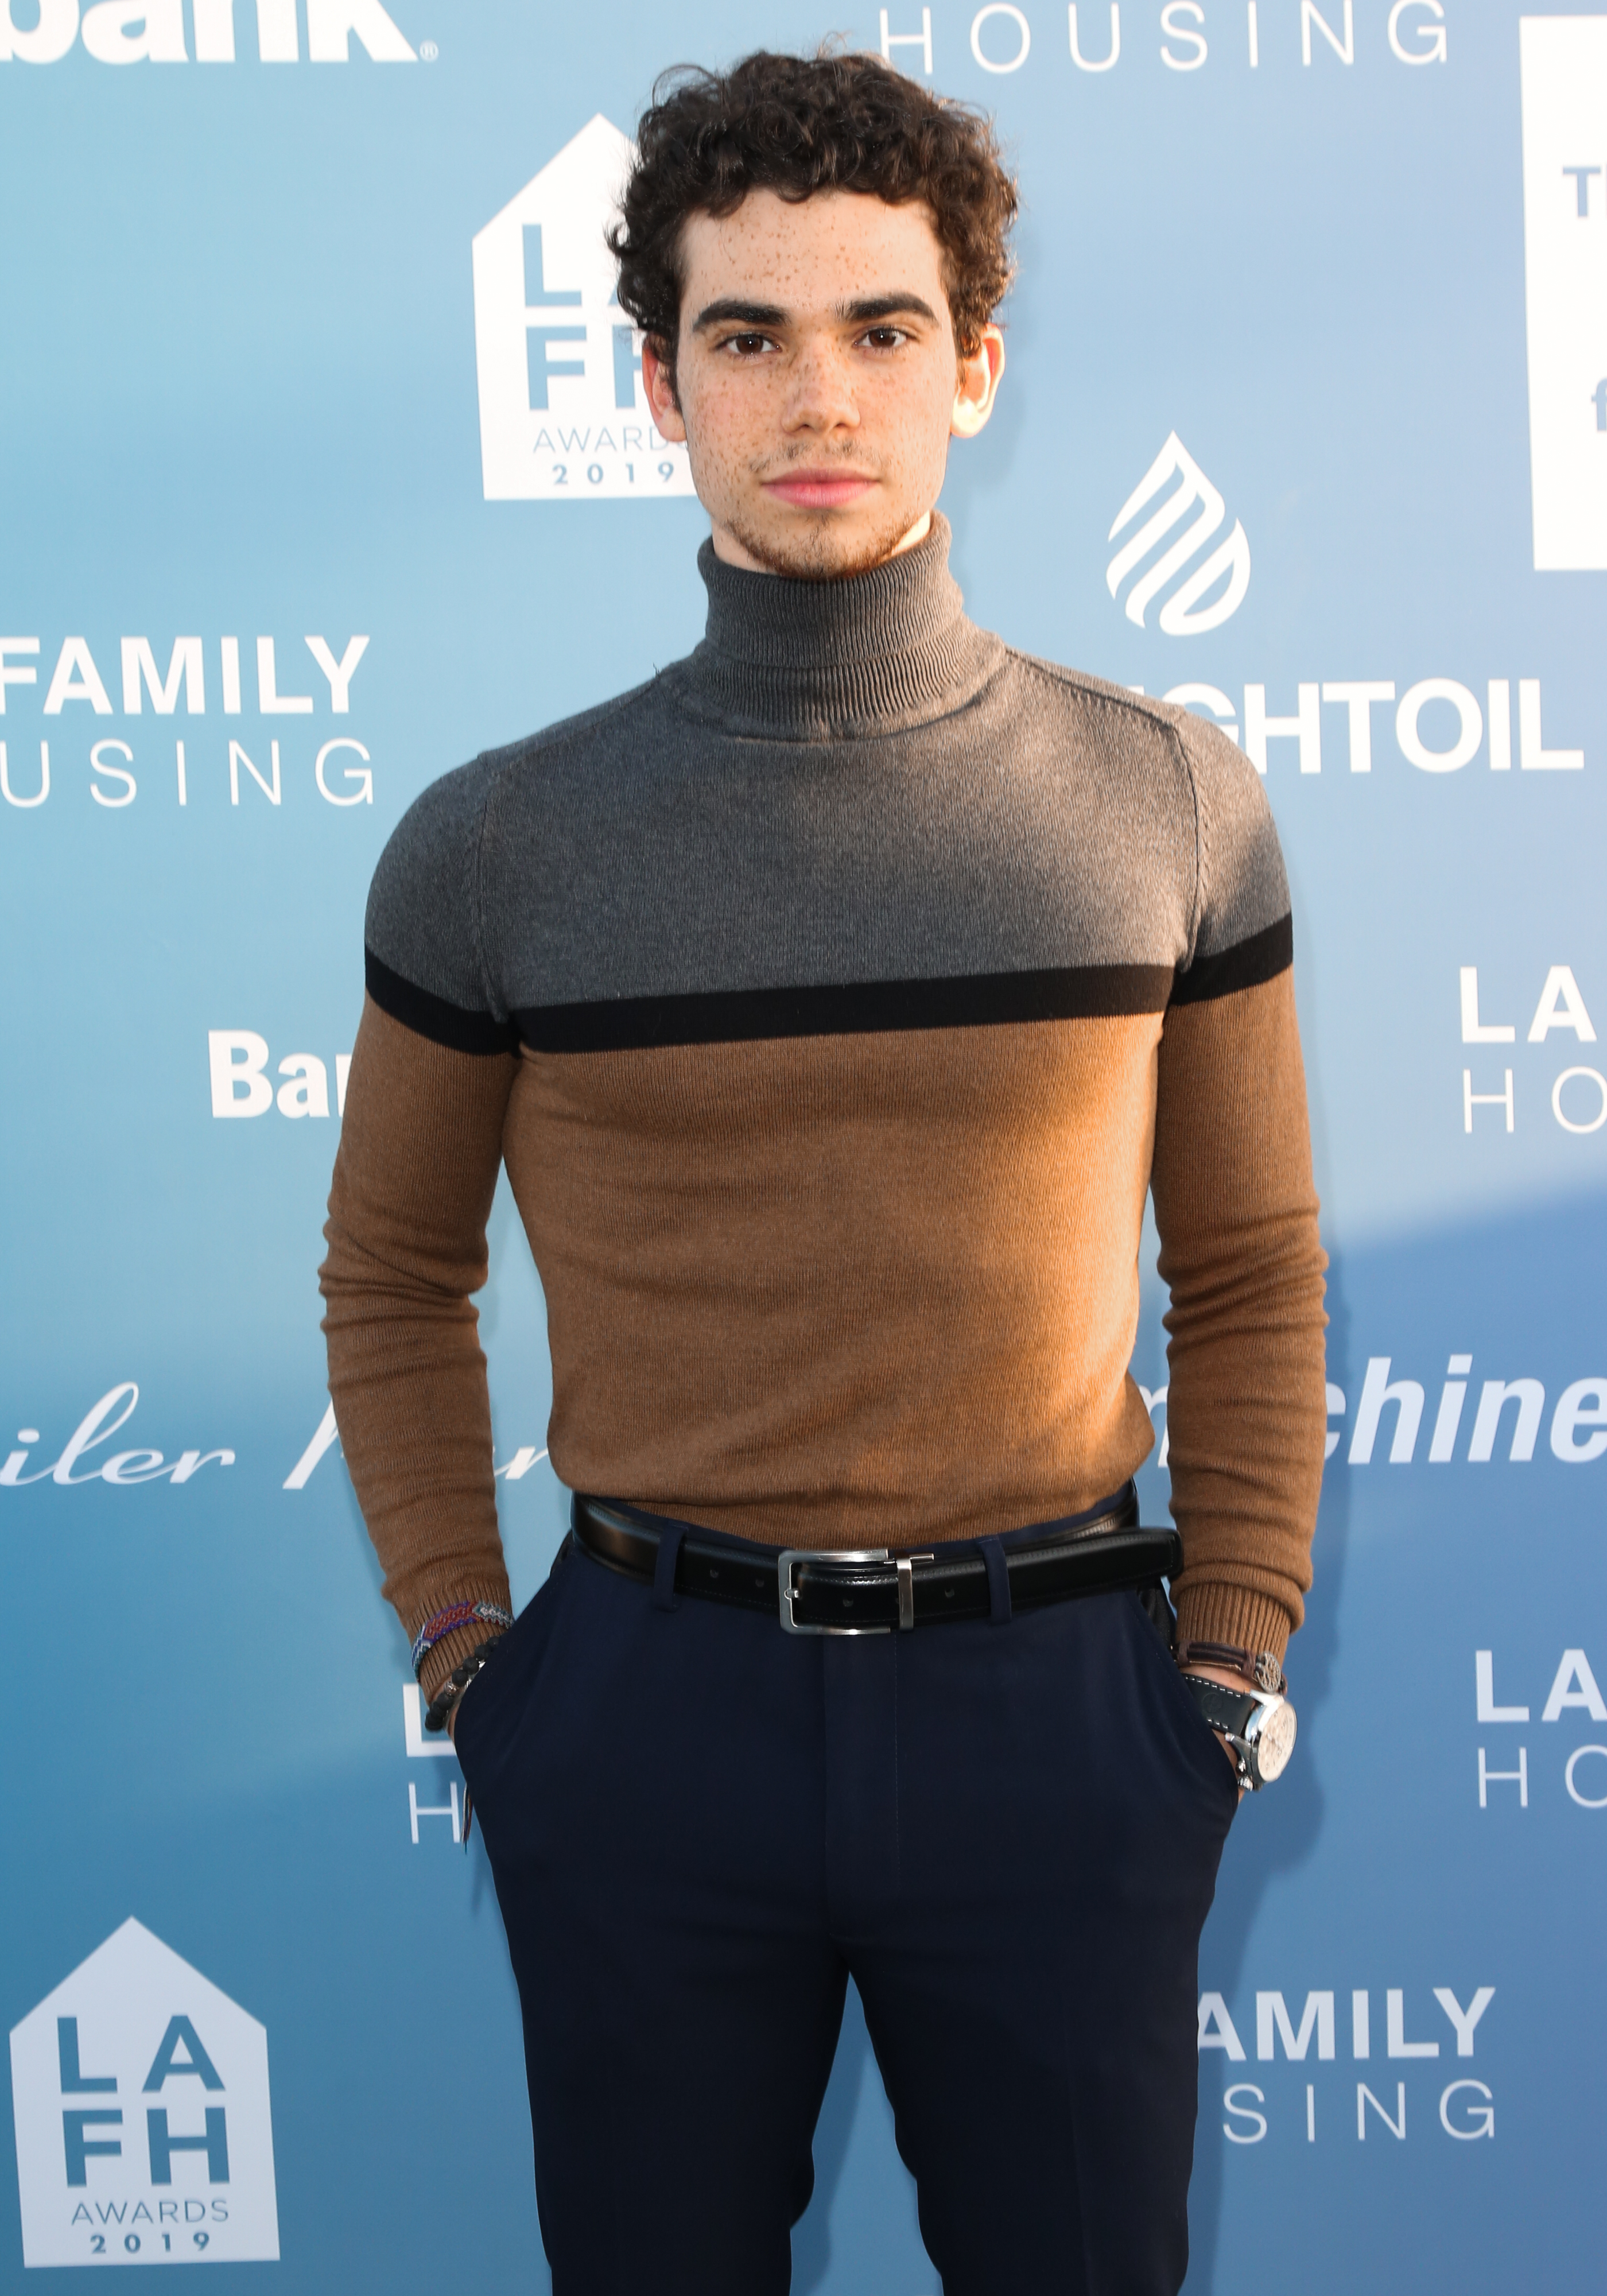 Cameron Boyce poses at the LA Family Housing Annual LAFH Awards and fundraiser celebration at The Lot on April 25, 2019, in West Hollywood, California | Source: Getty Images